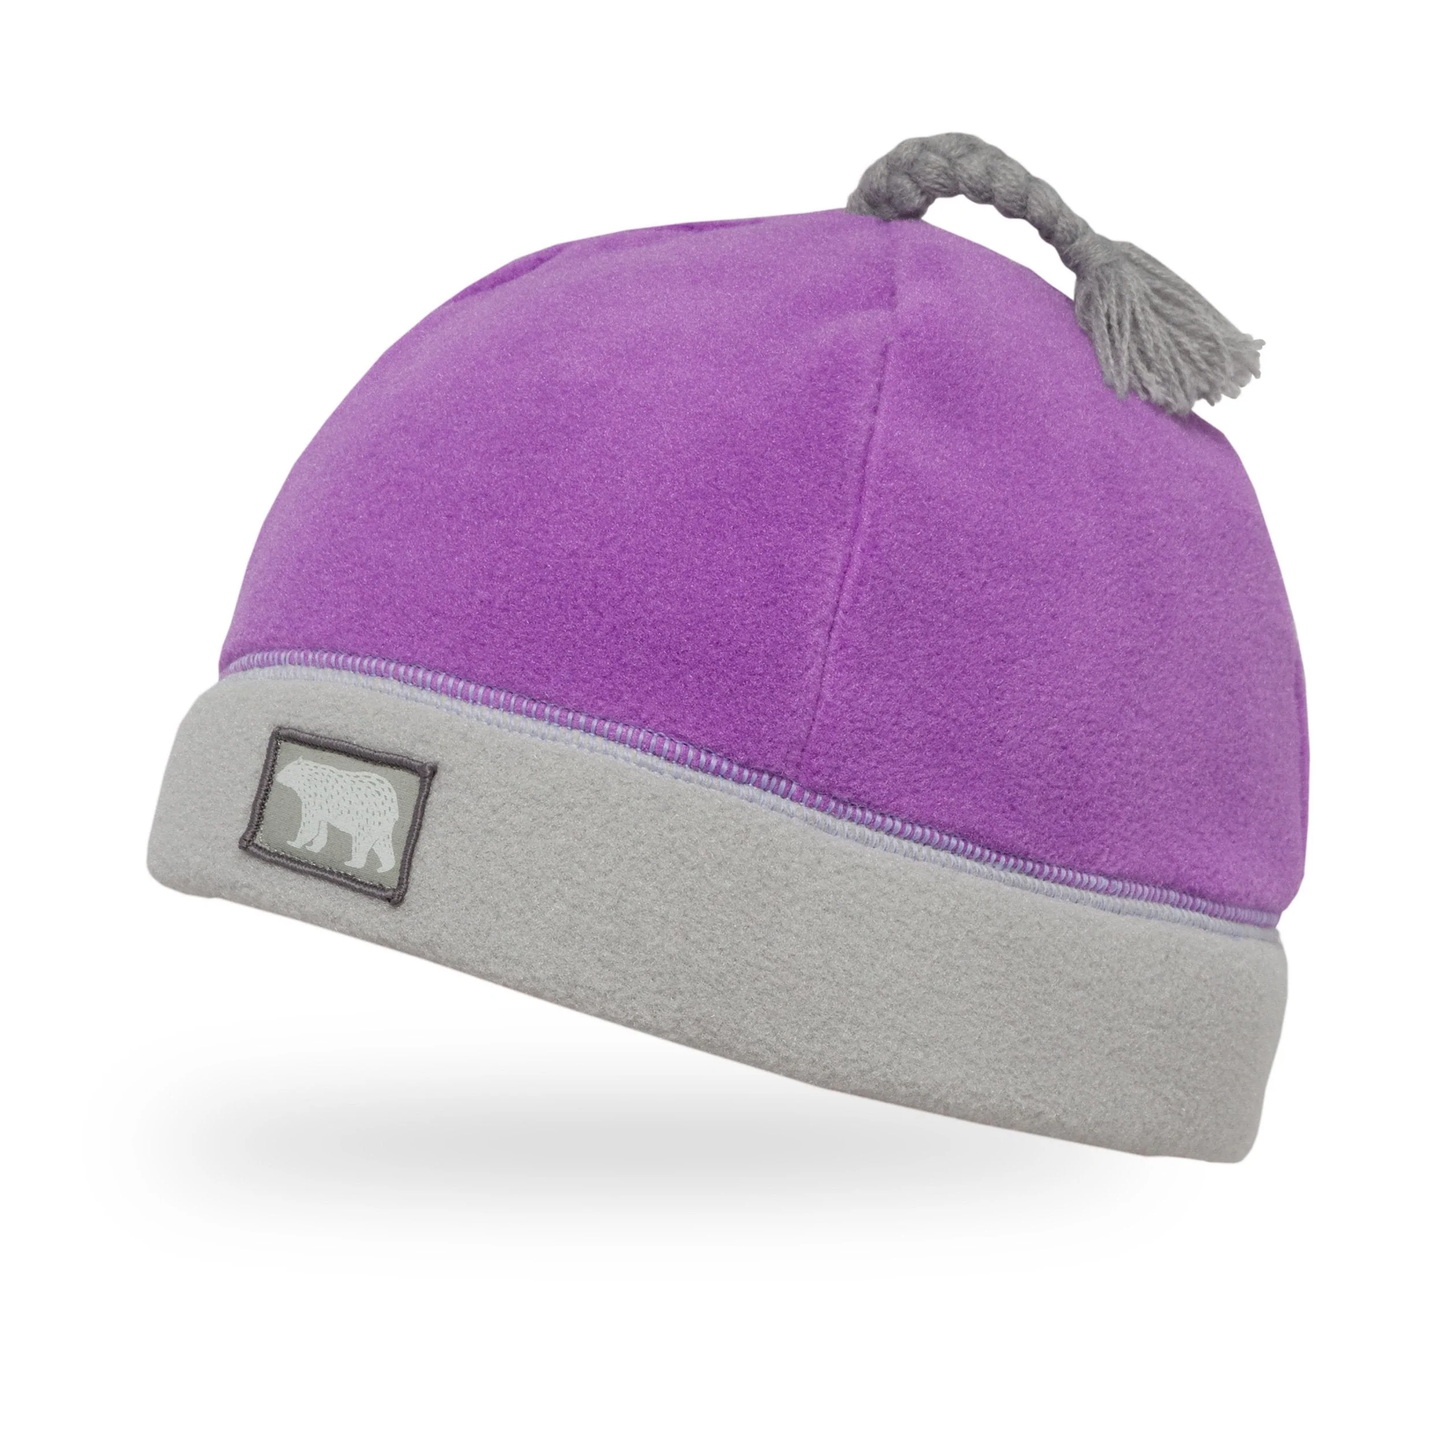 Sunday Afternoons Kids Cozy Critter Beanie